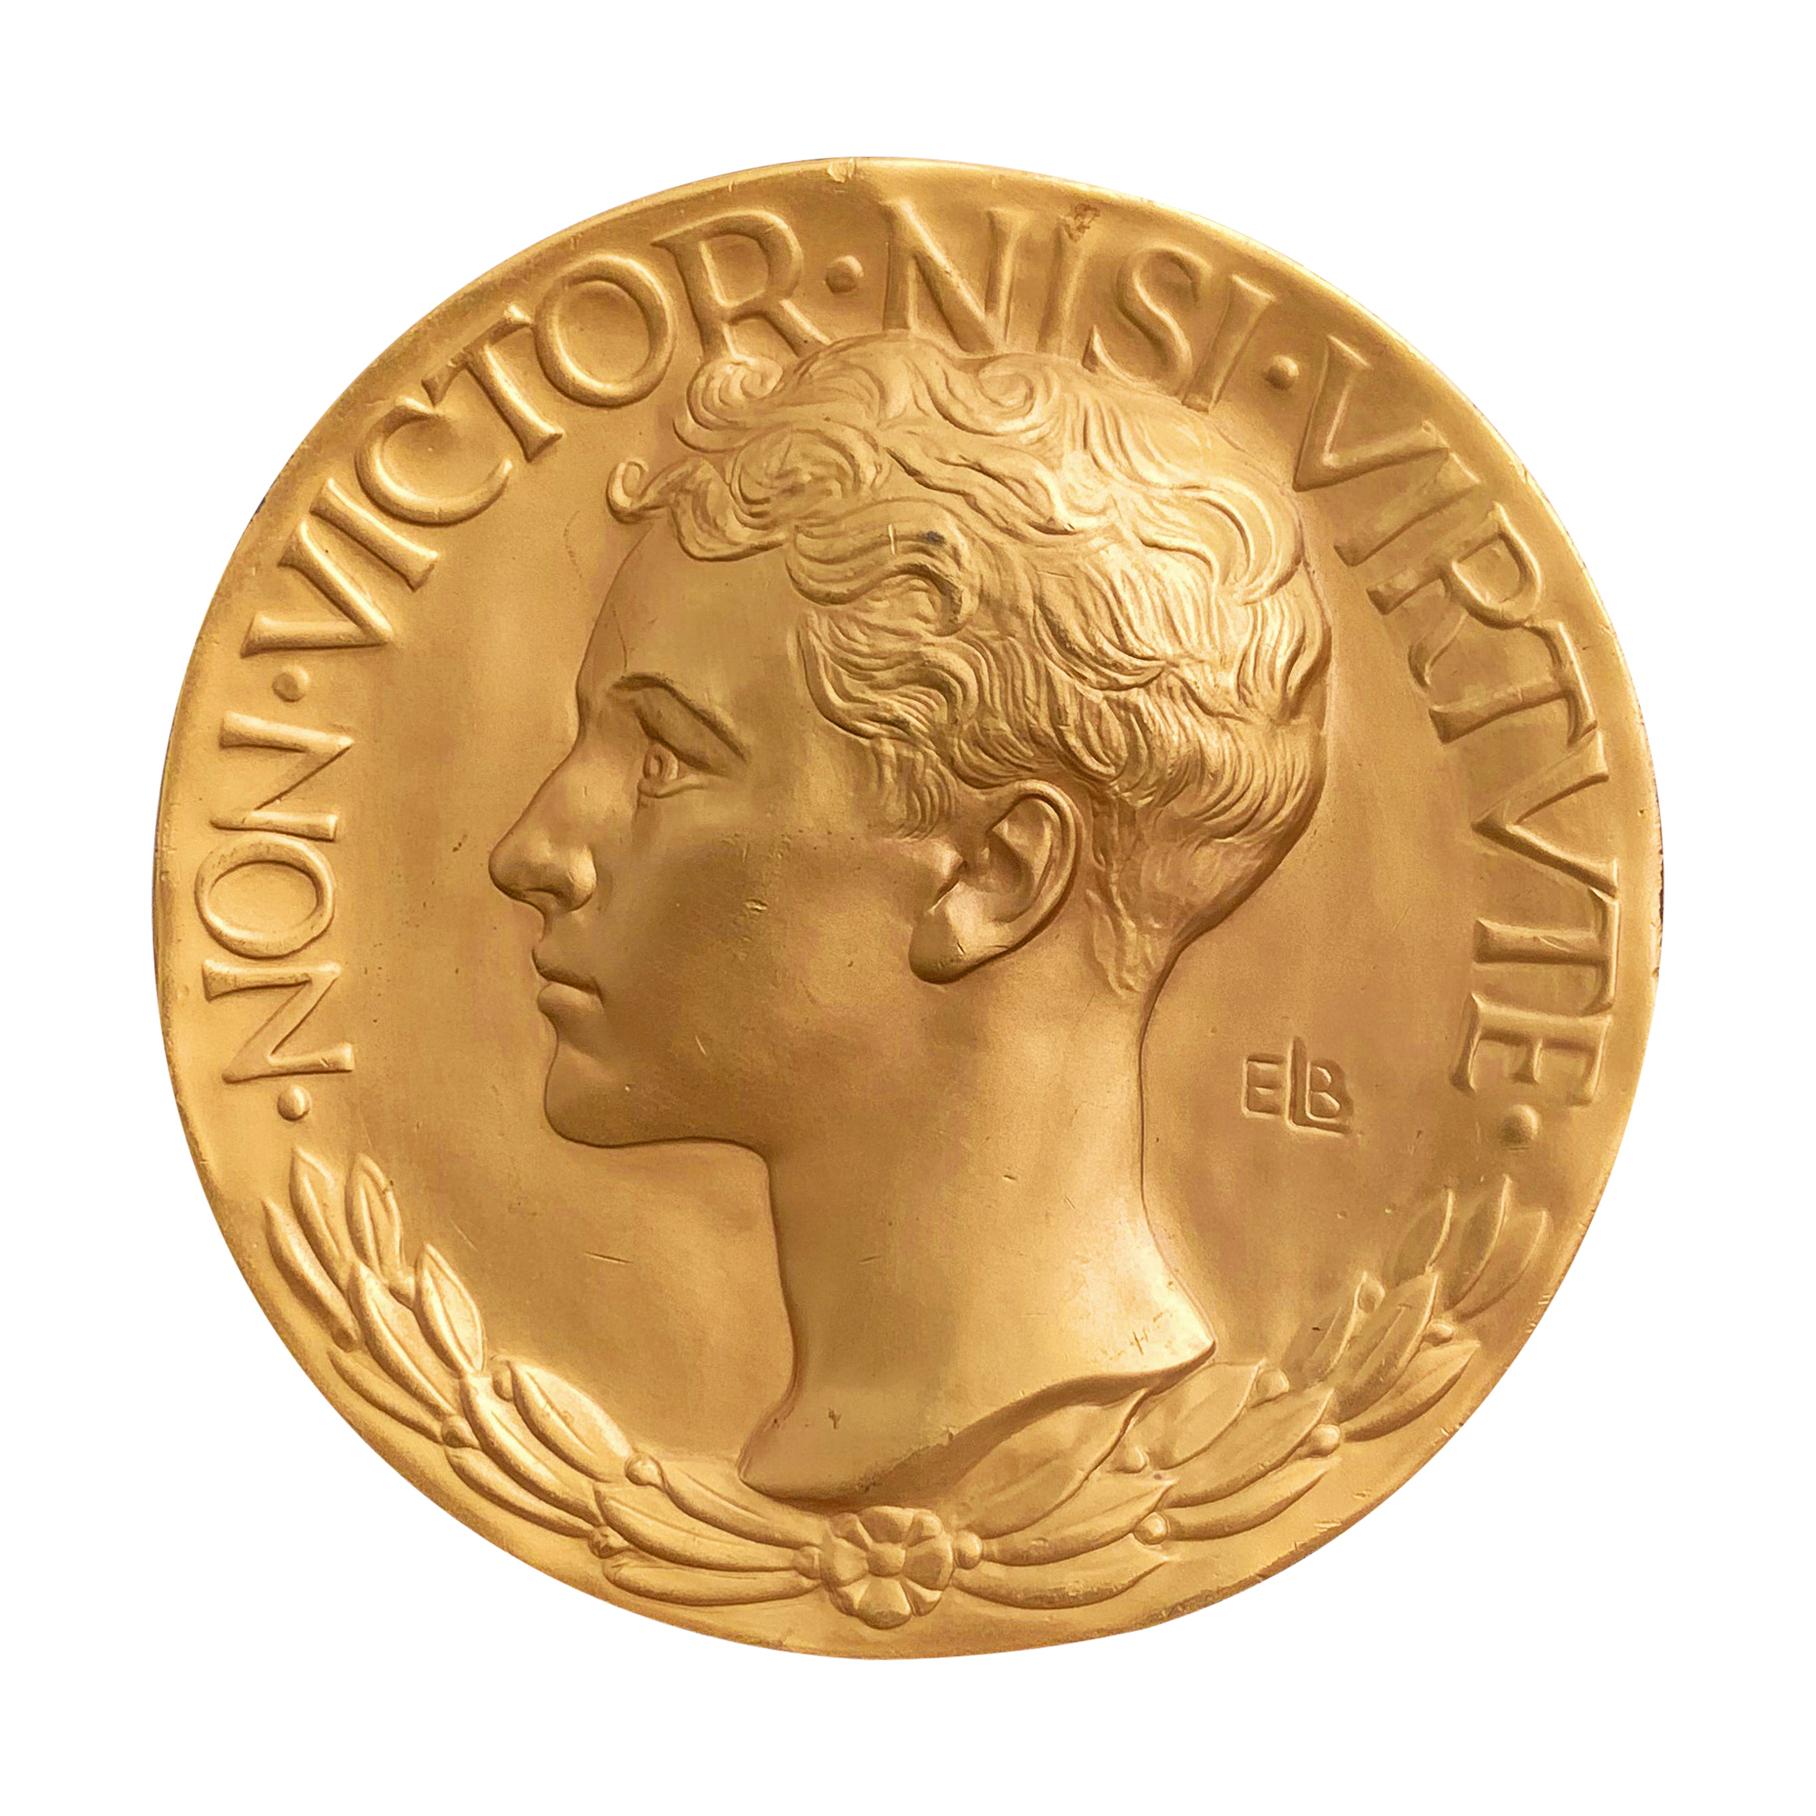 "Loomis Athletic Medal" with Profile of Male Youth by Evelyn Longman, Art Deco